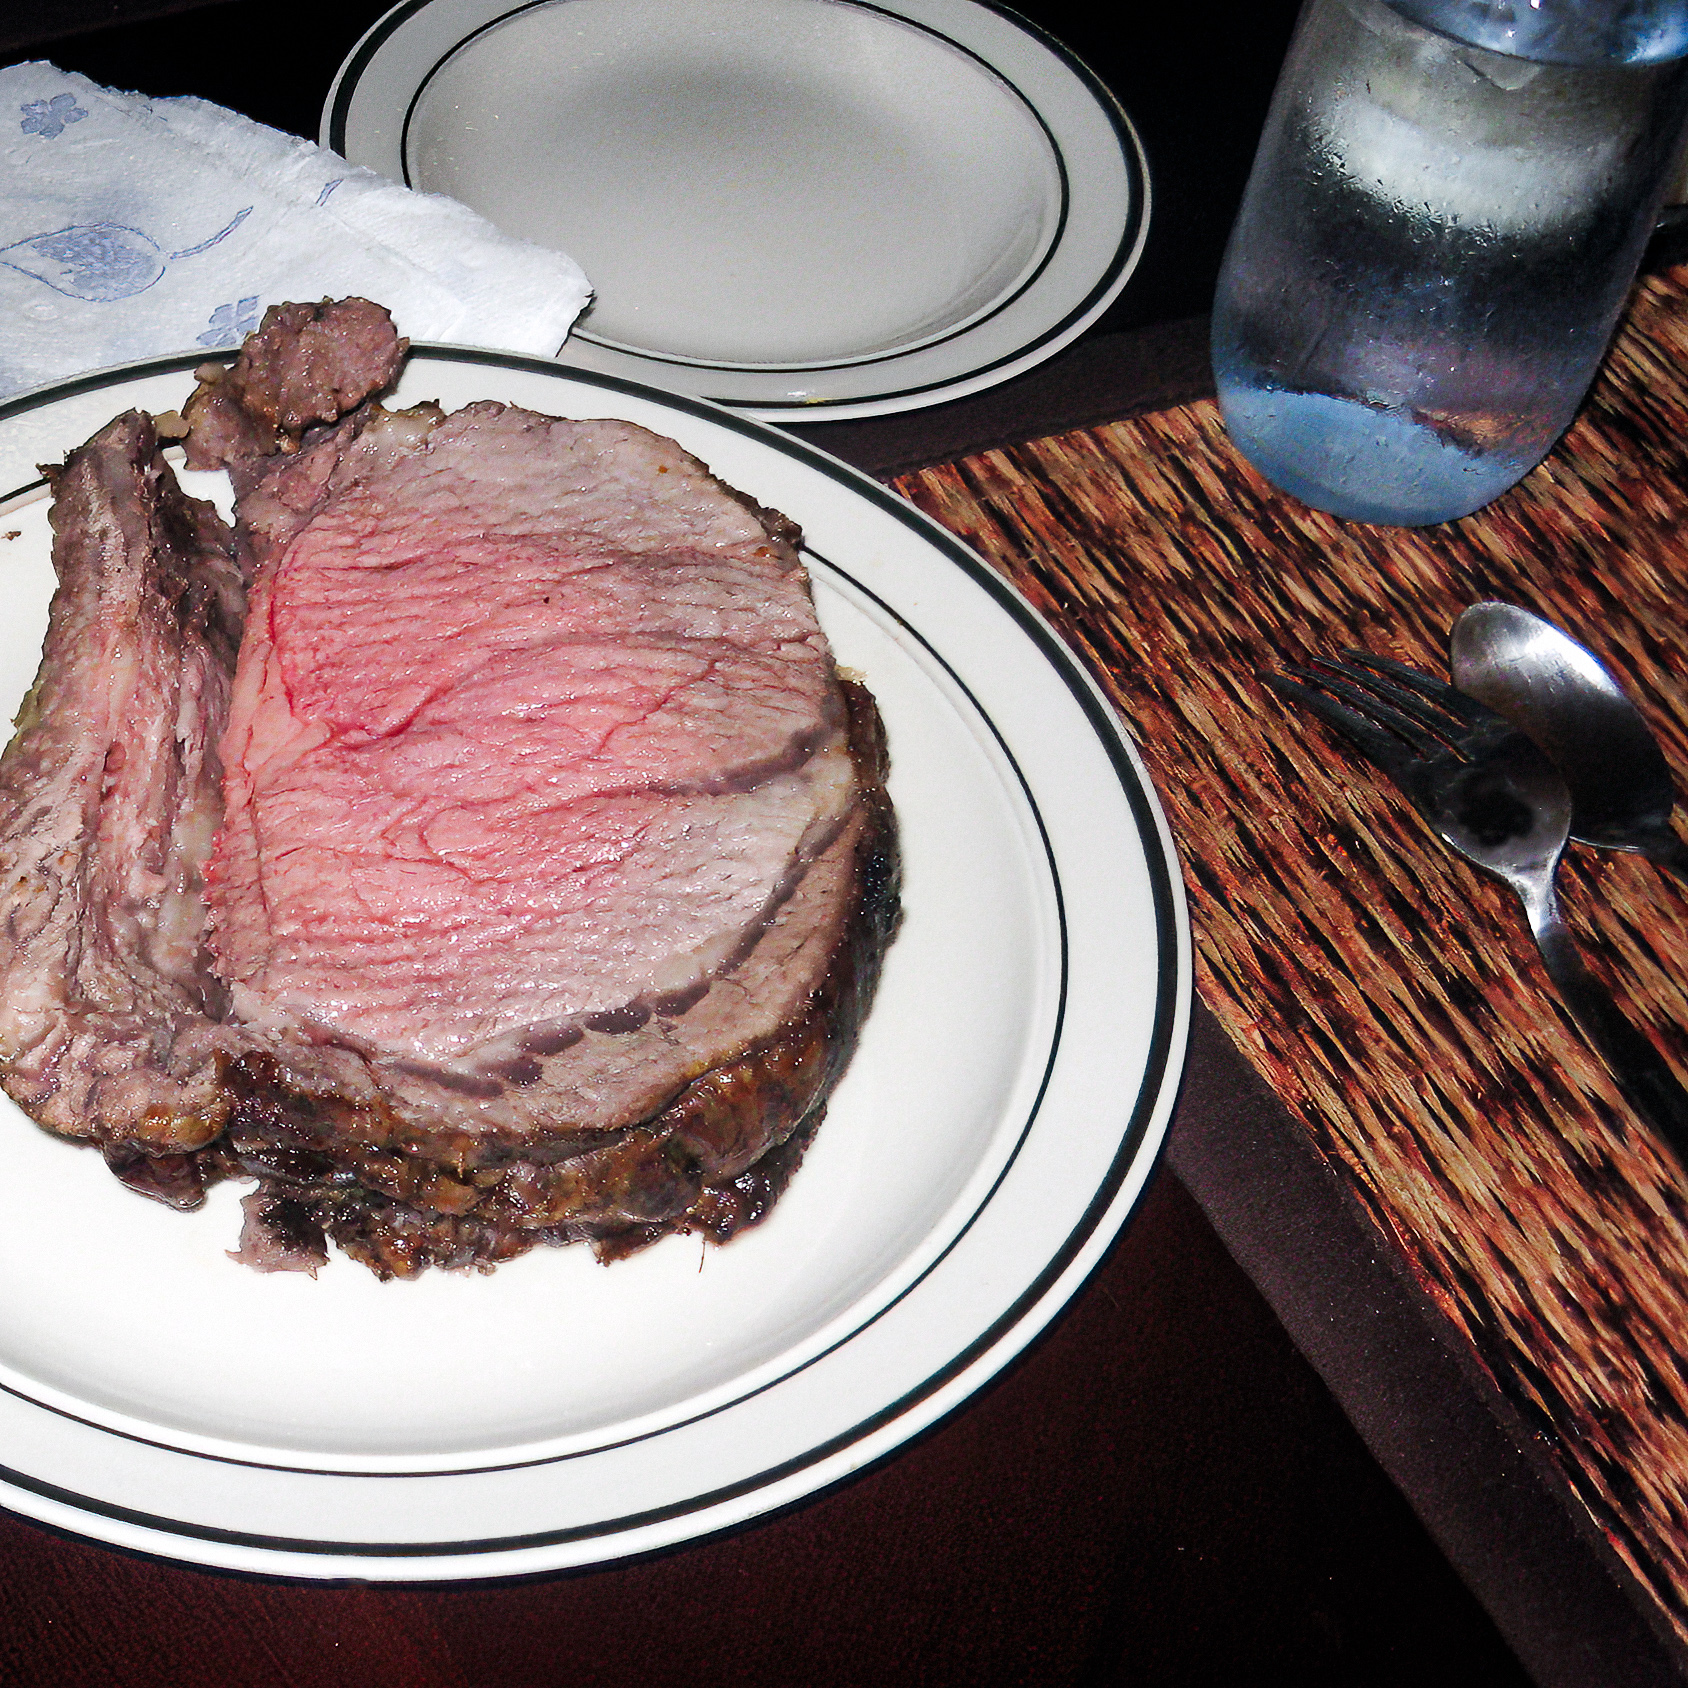 Dinner at Home with Friends - medium rare